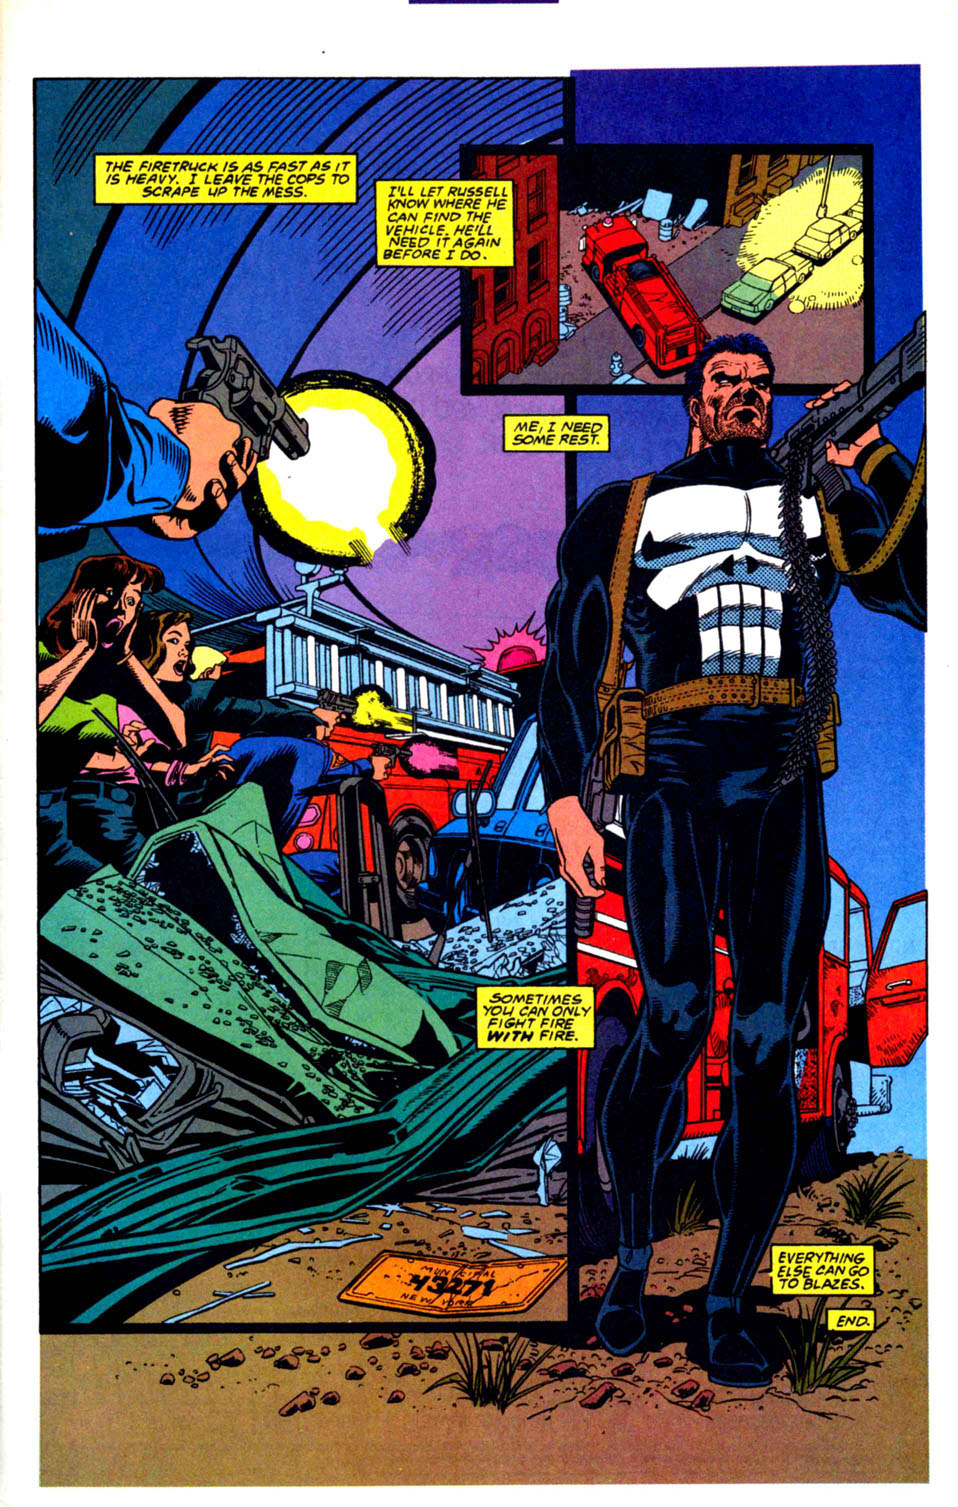 The Punisher (1987) Issue #84 - Firefight #03 #91 - English 23